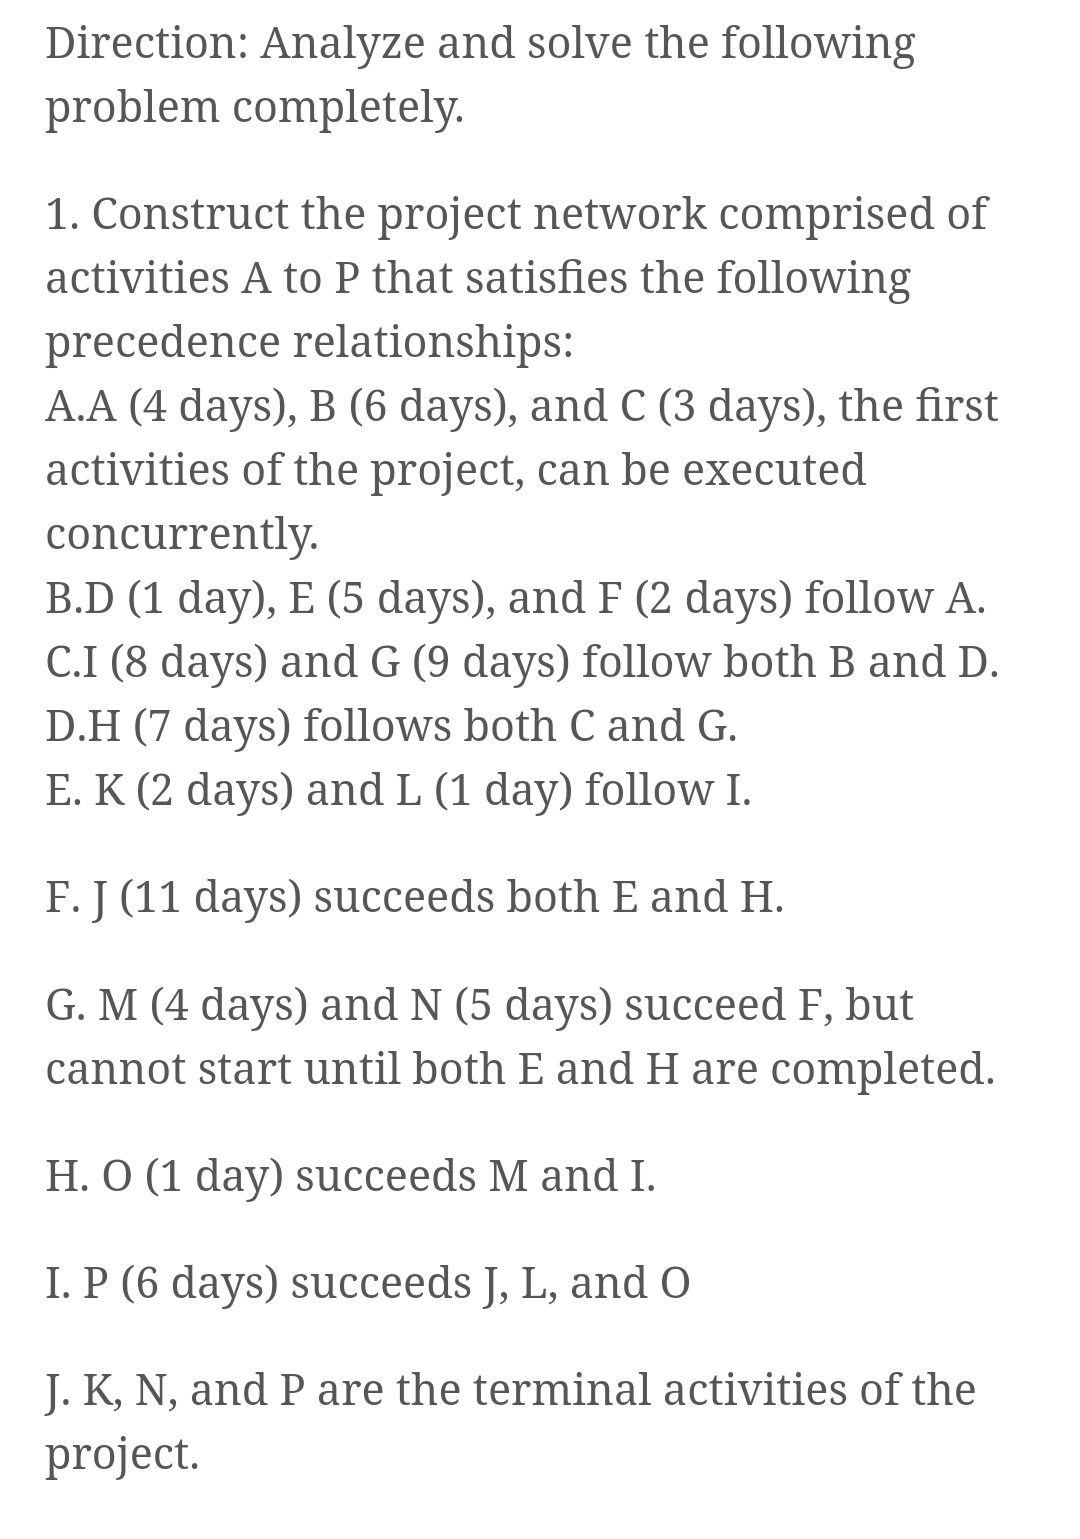 Direction: Analyze and solve the following
problem completely.
1. Construct the project network comprised of
activities A to P that satisfies the following
precedence relationships:
A.A (4 days), B (6 days), and C (3 days), the first
activities of the project, can be executed
concurrently.
B.D (1 day), E (5 days), and F (2 days) follow A.
C.I (8 days) and G (9 days) follow both B and D.
D.H (7 days) follows both C and G.
E. K (2 days) and L (1 day) follow I.
F. J (11 days) succeeds both E and H.
G. M (4 days) and N (5 days) succeed F, but
cannot start until both E and H are completed.
H. O (1 day) succeeds M and I.
I. P (6 days) succeeds J, L, and O
J. K, N, and P are the terminal activities of the
project.
